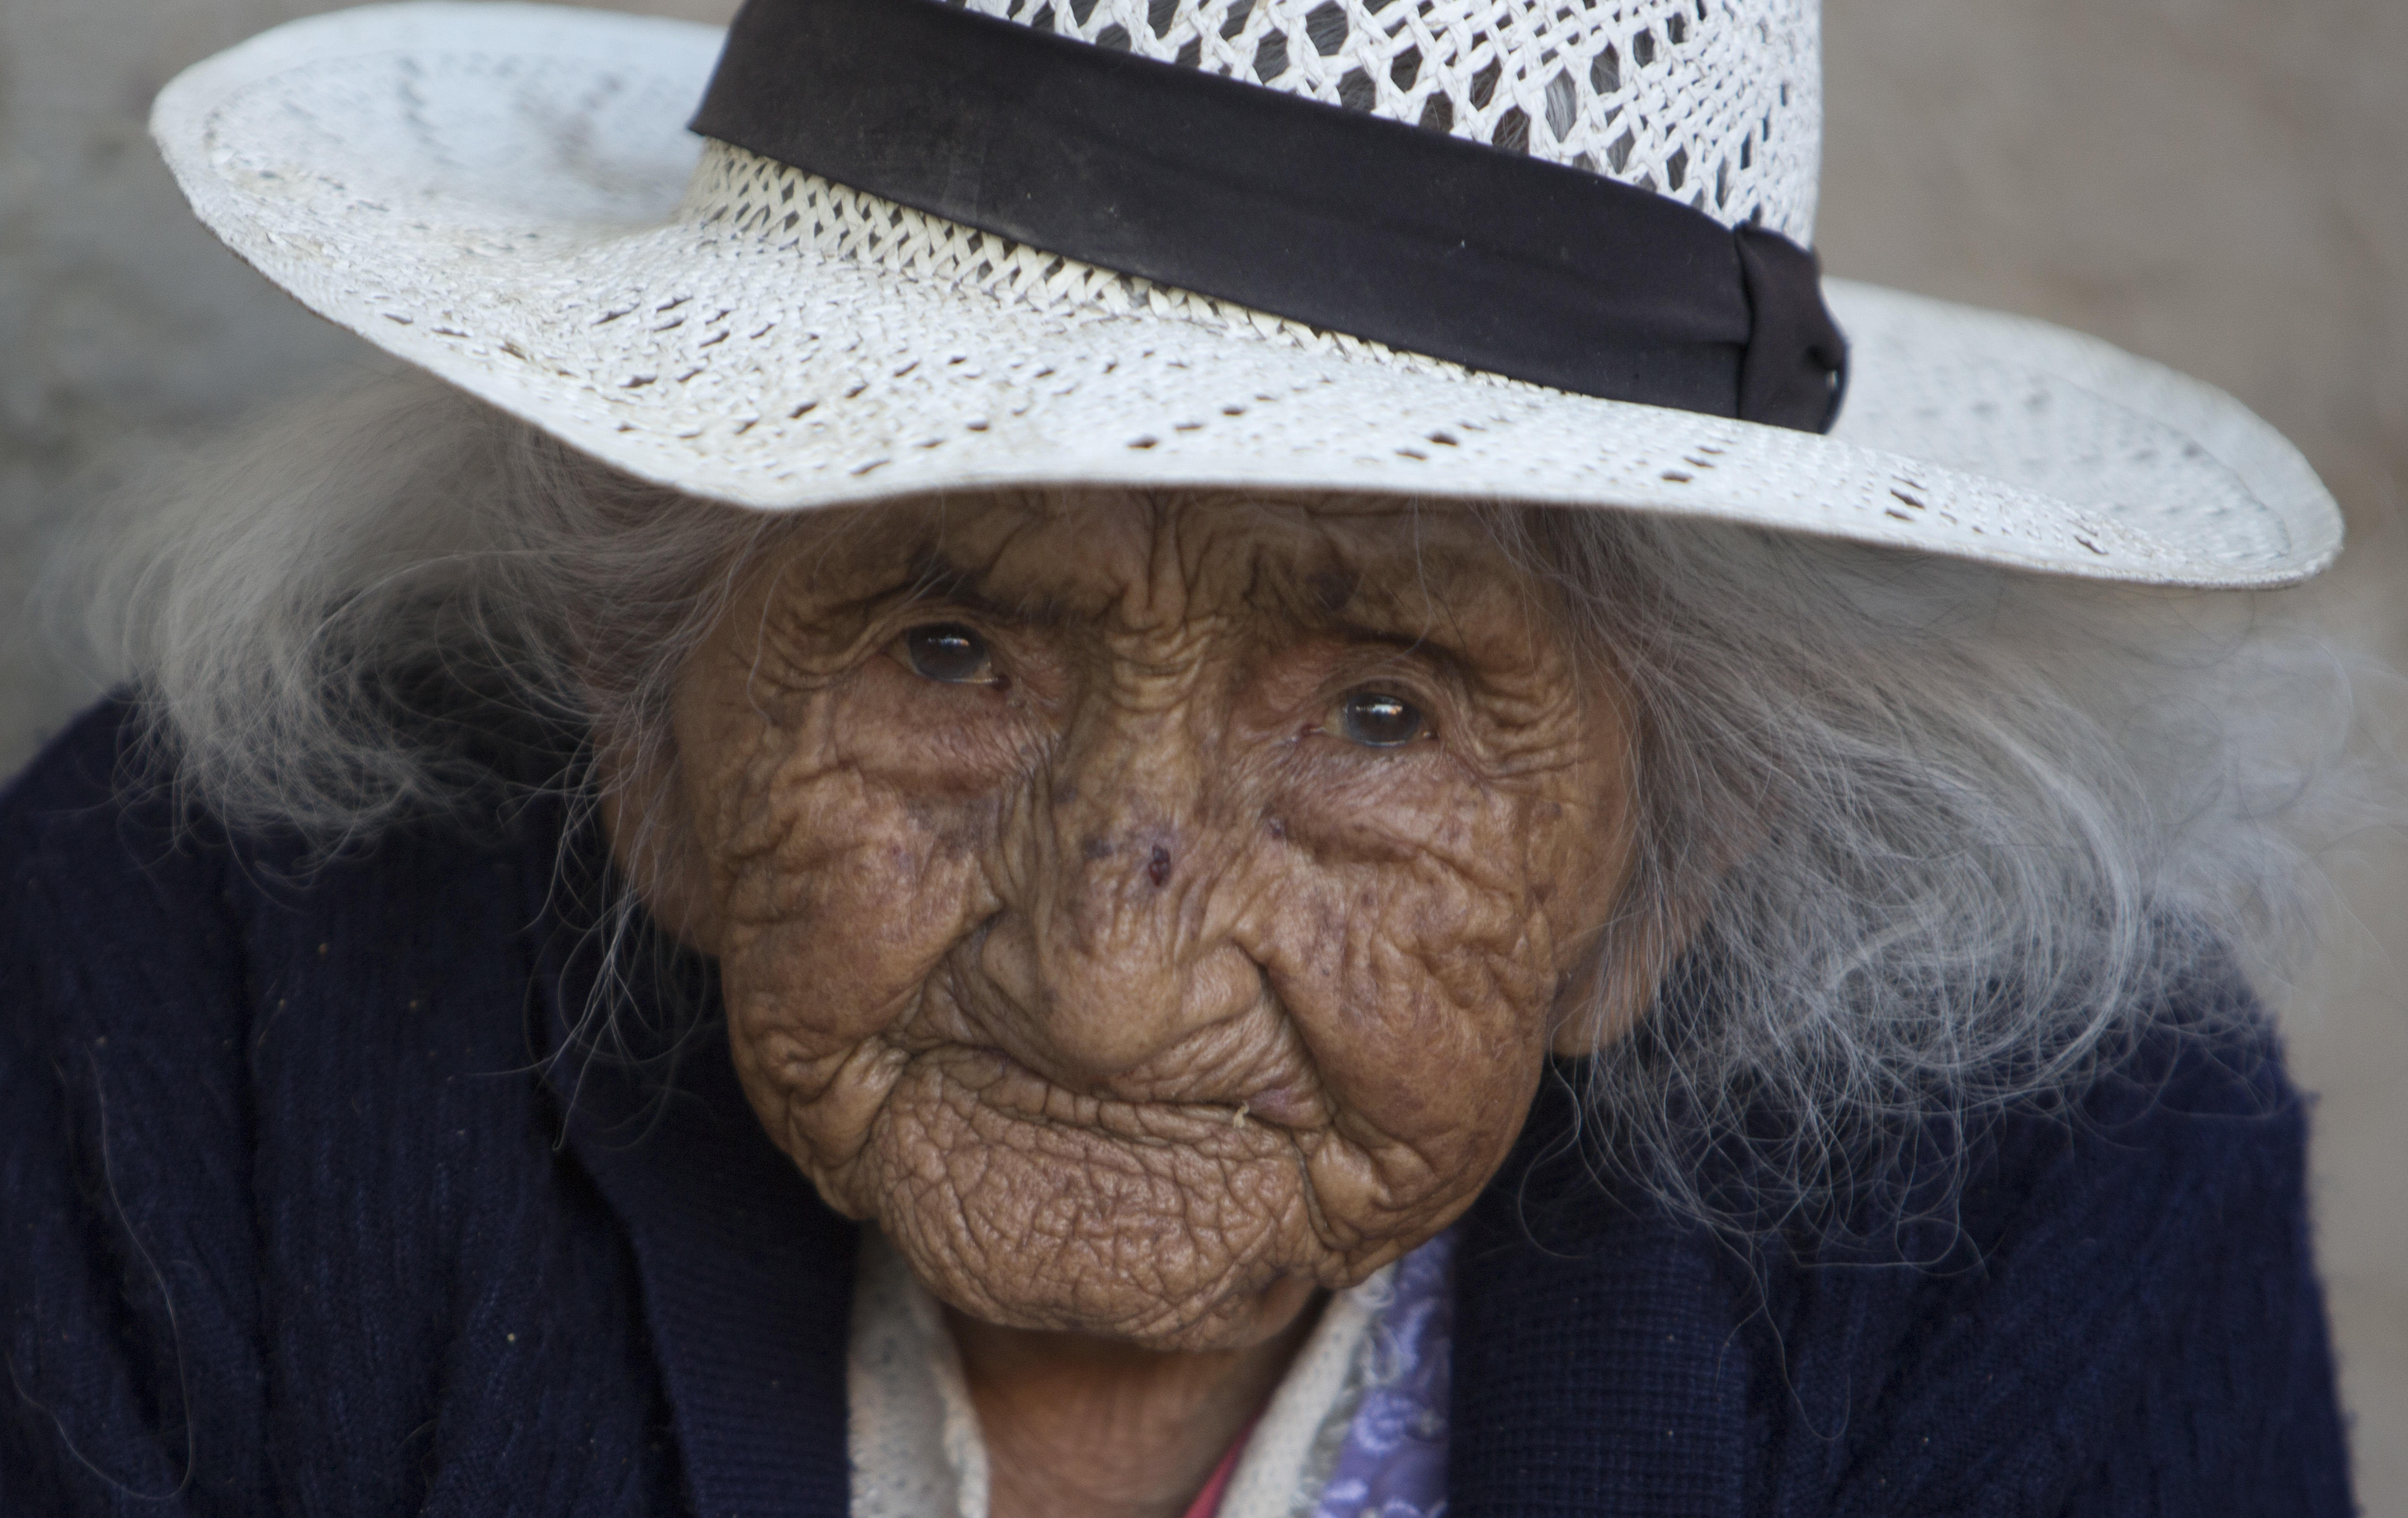 Bolivian Julia Flores Colque may be world's oldest living woman, but